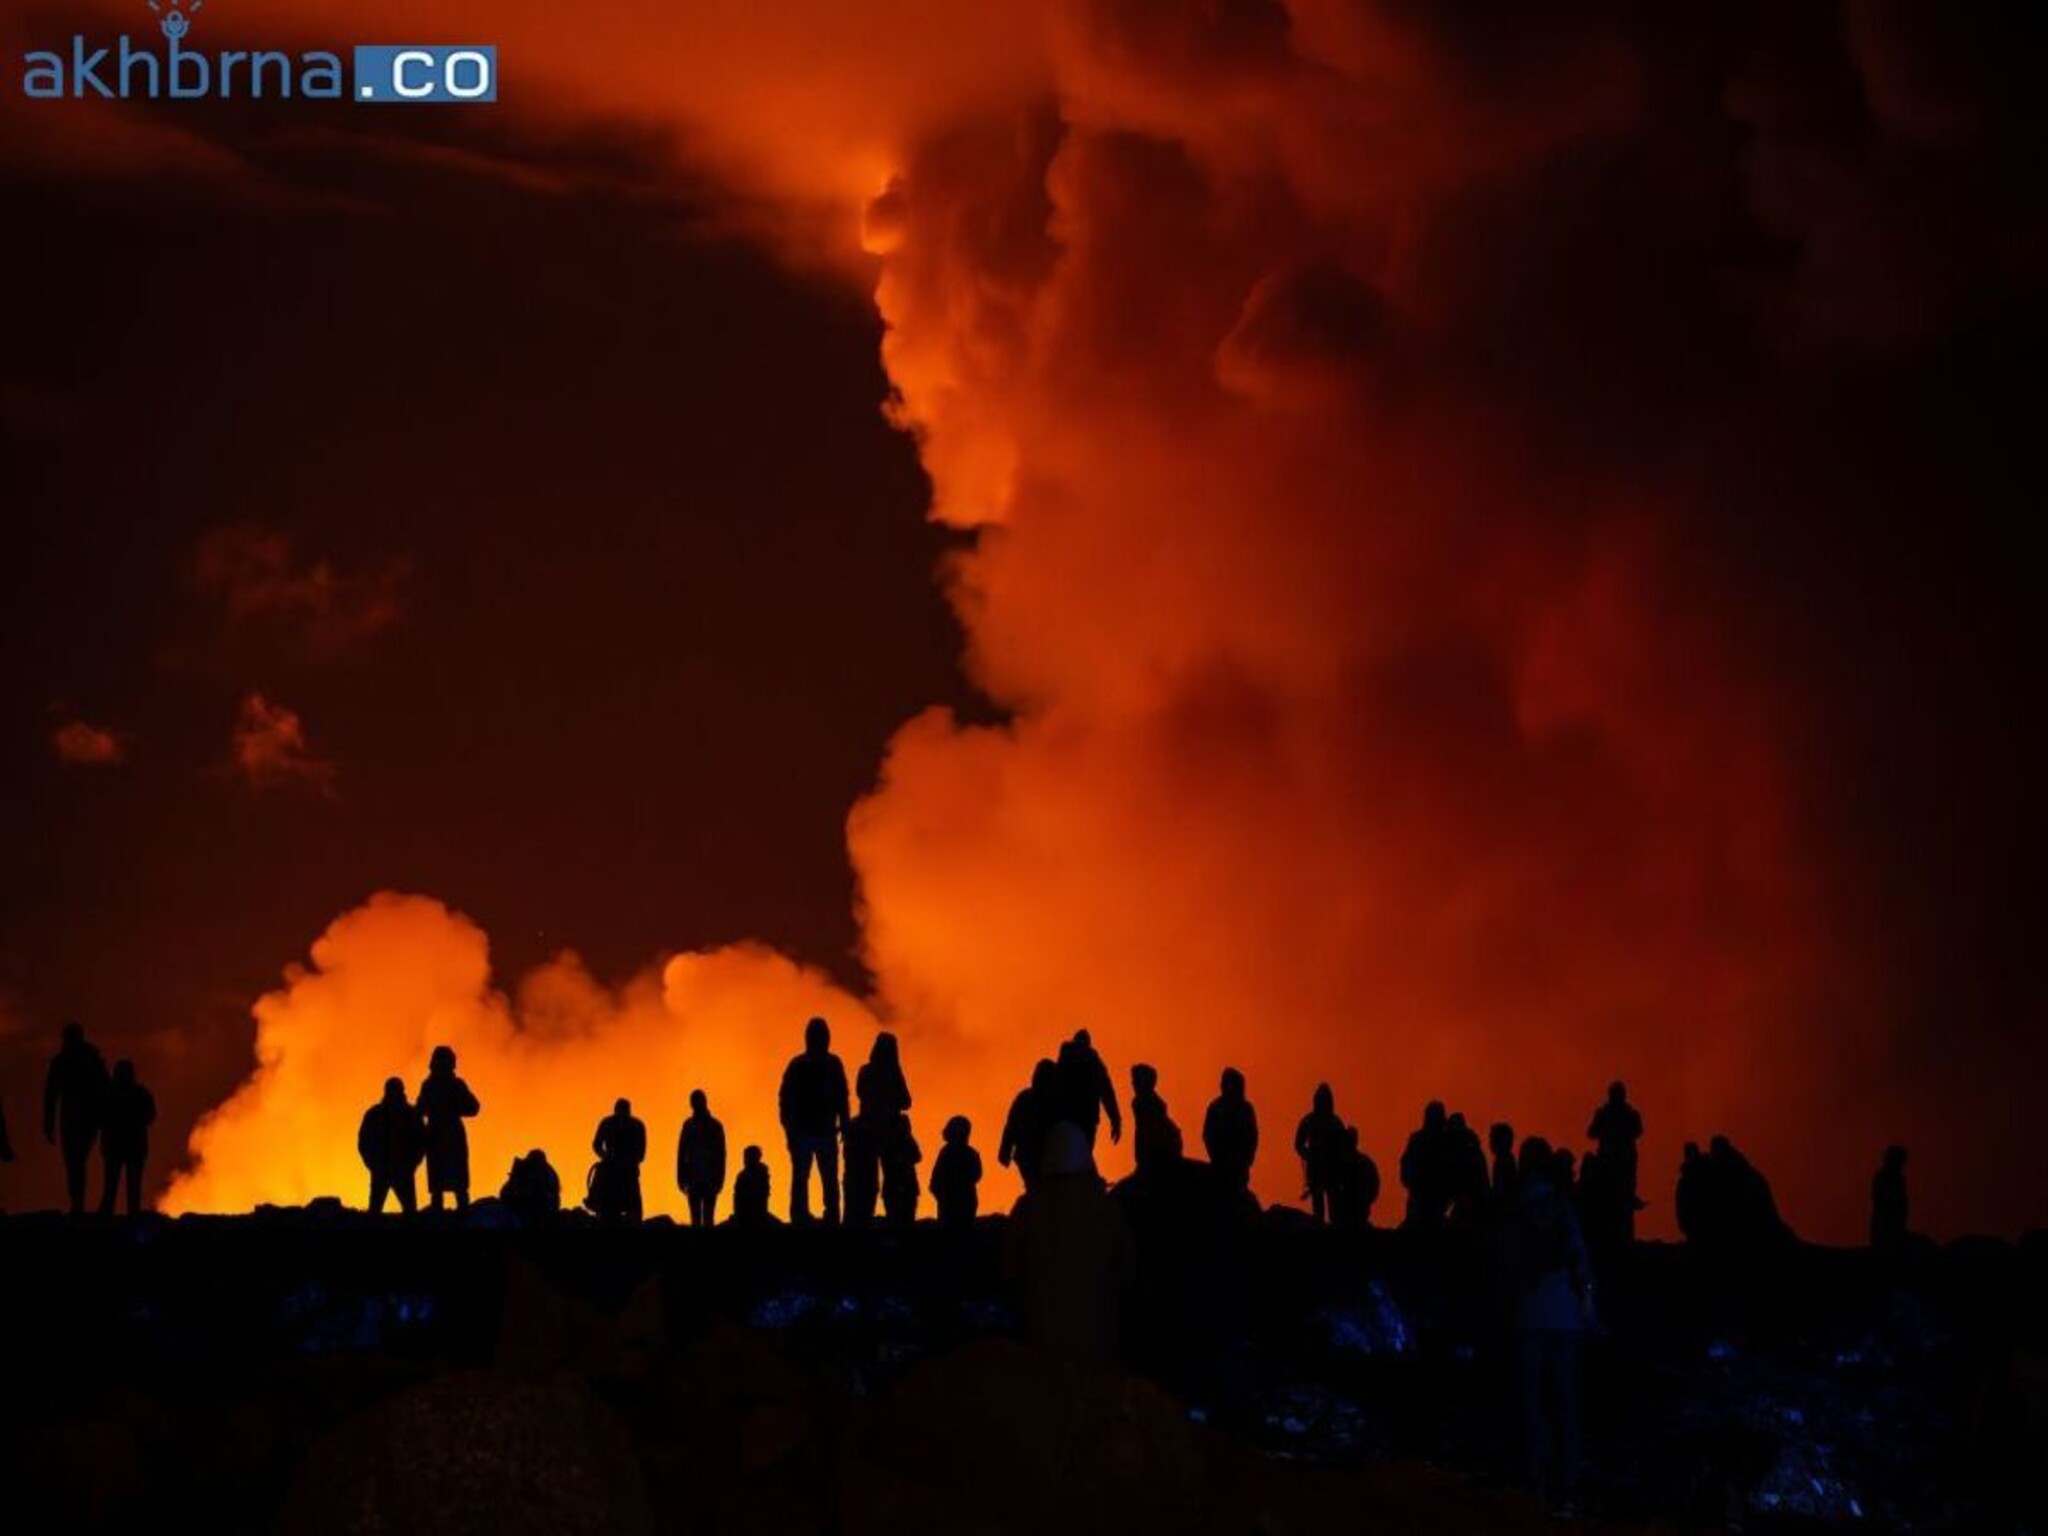 Iceland volcano erupts, prompting state of emergency